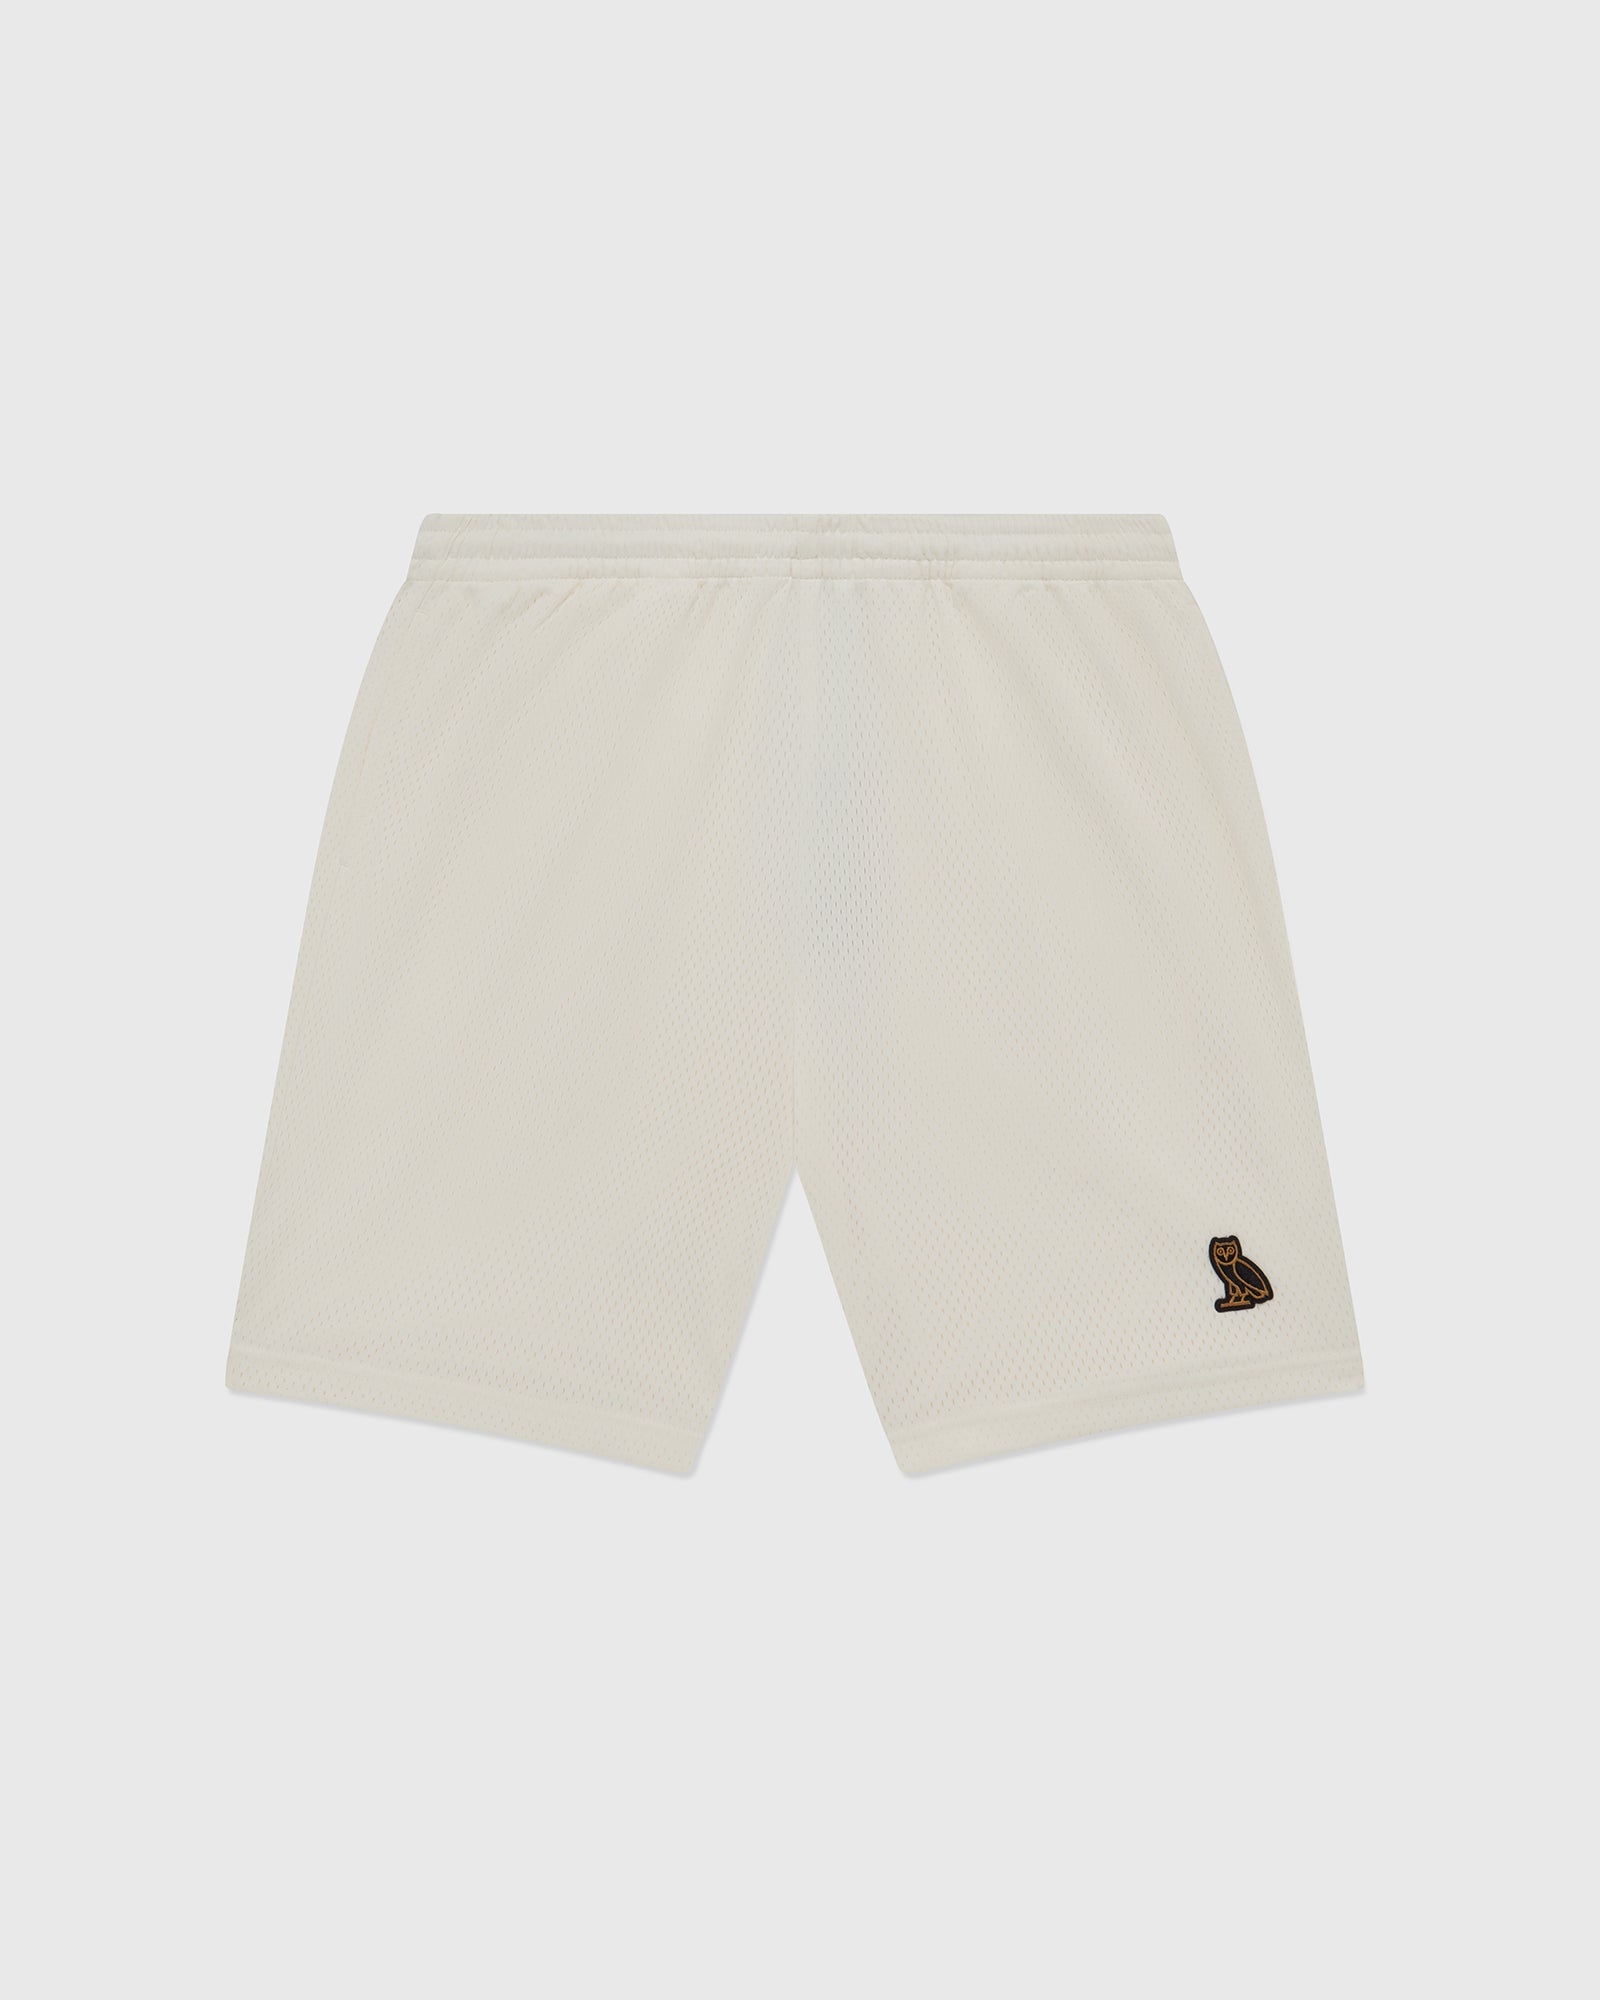 Classic Mesh Short - Off-White - October's Very Own